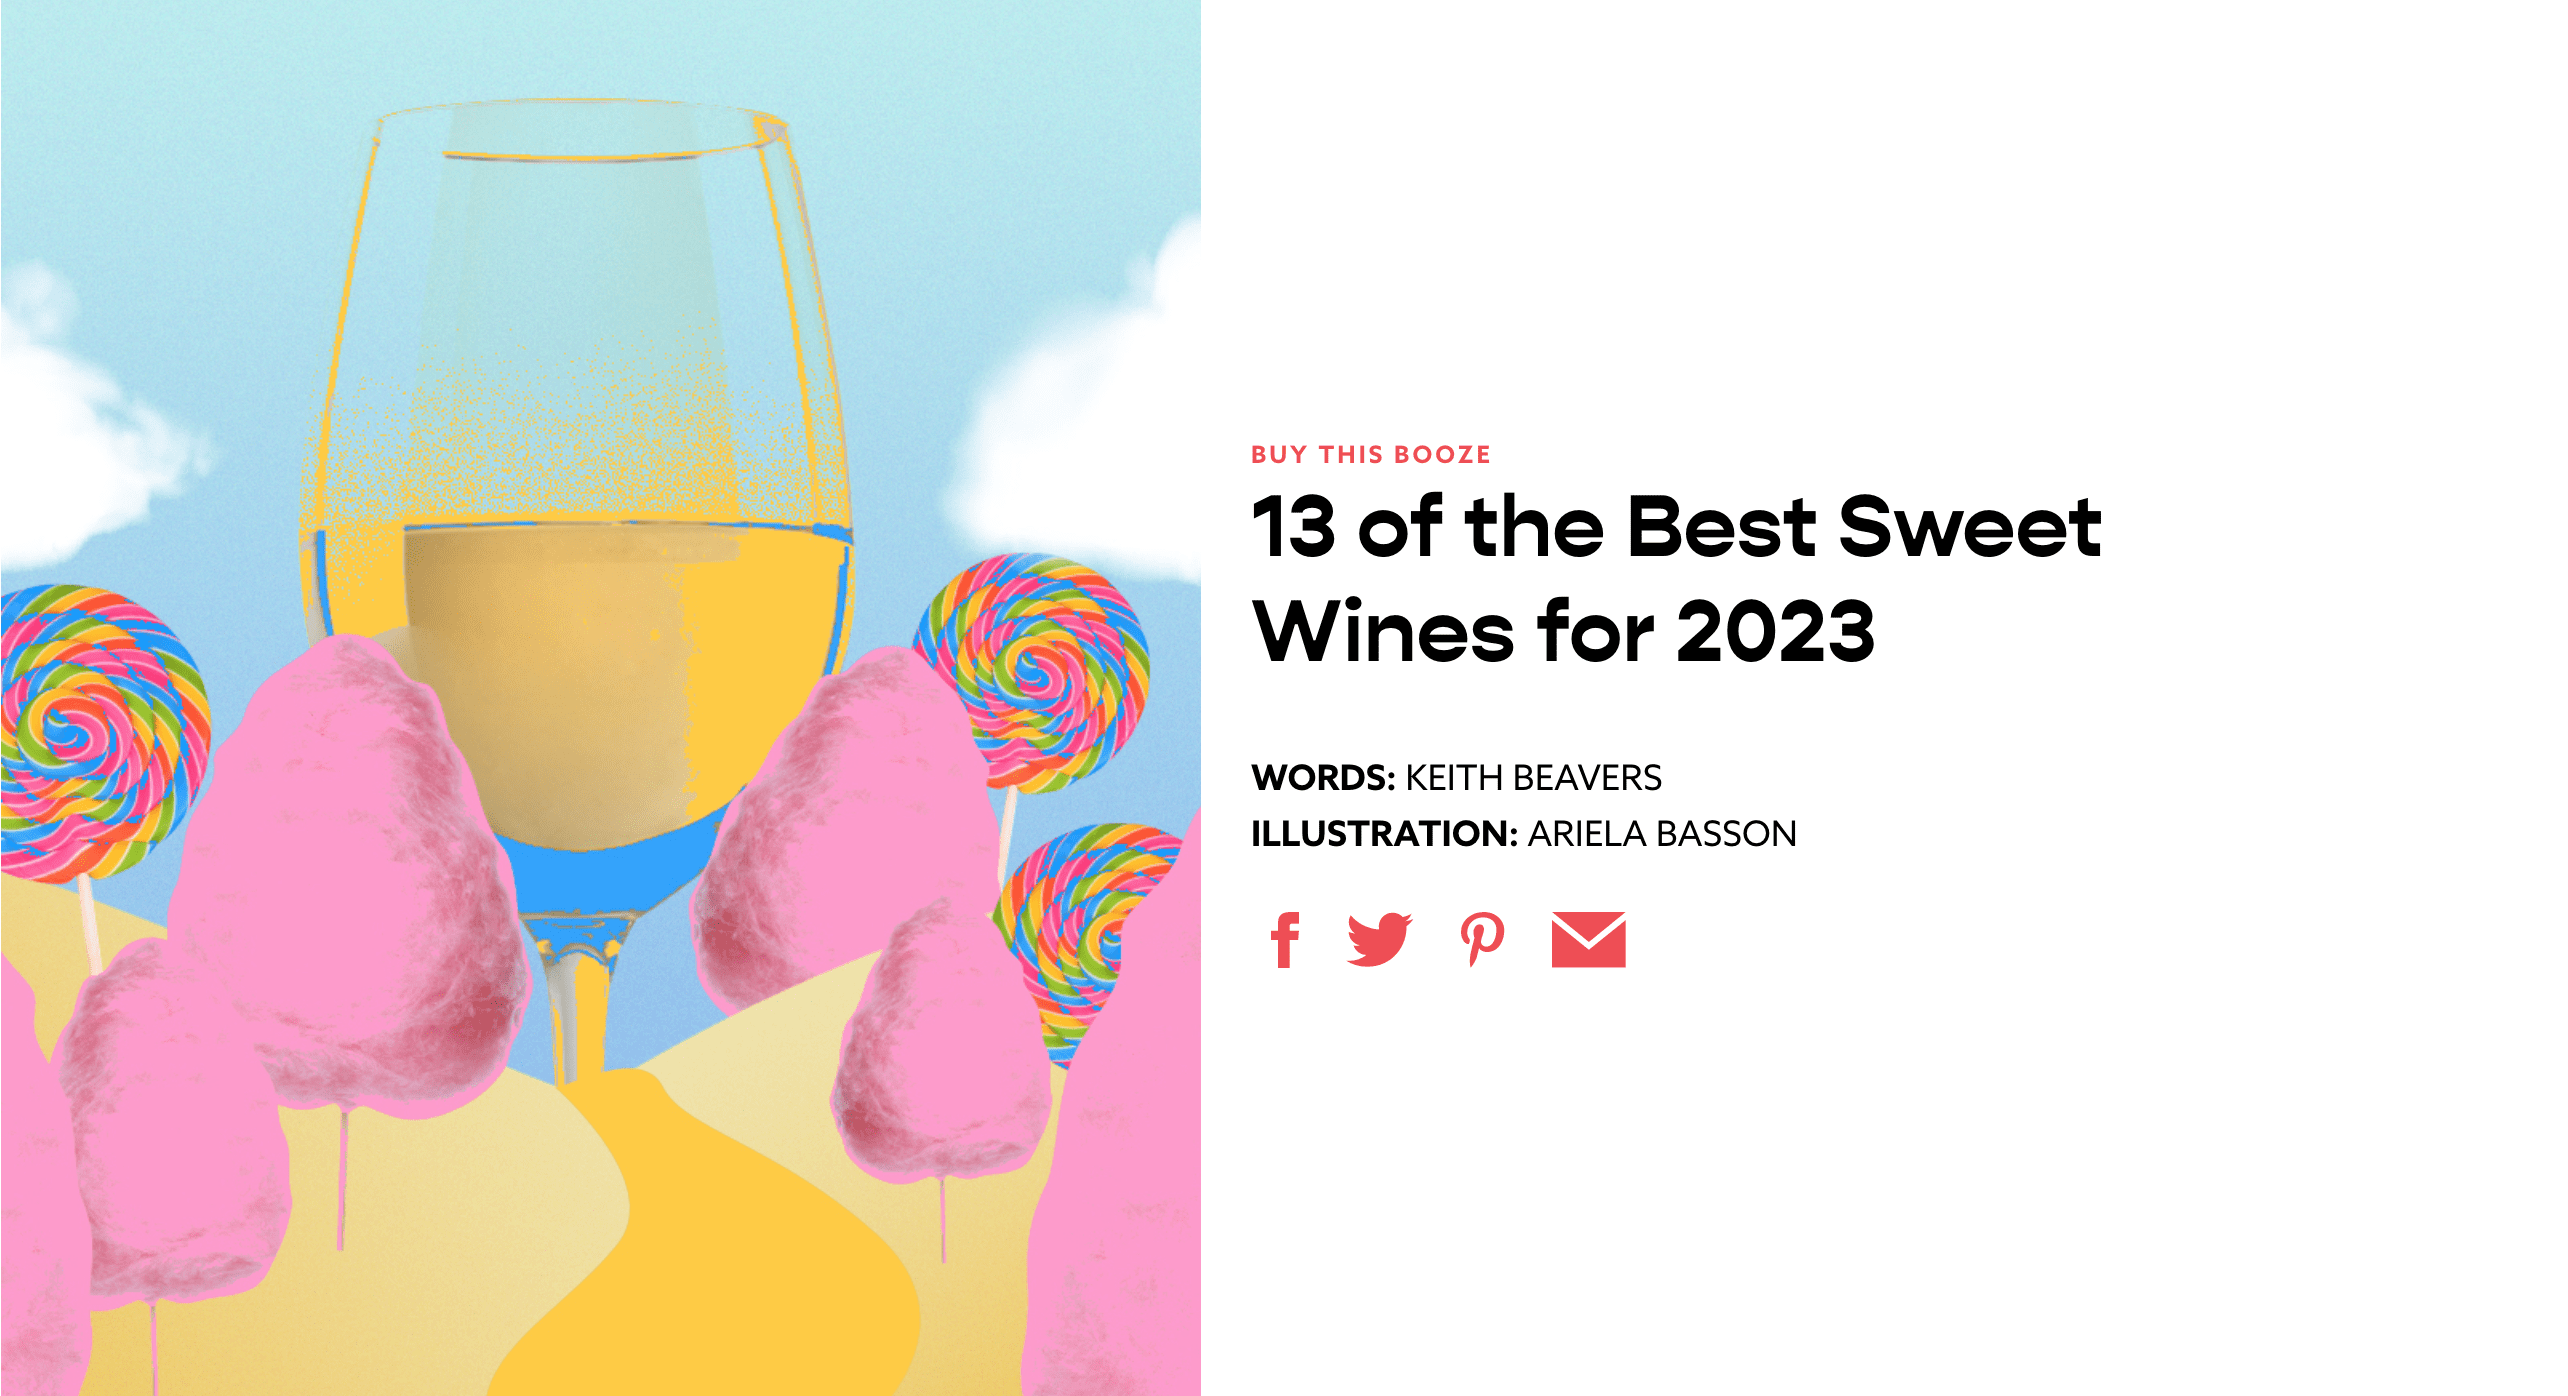 Two Mazza wines Included in VinePair’s Listing of 13 Best Sweet Wines of 2023